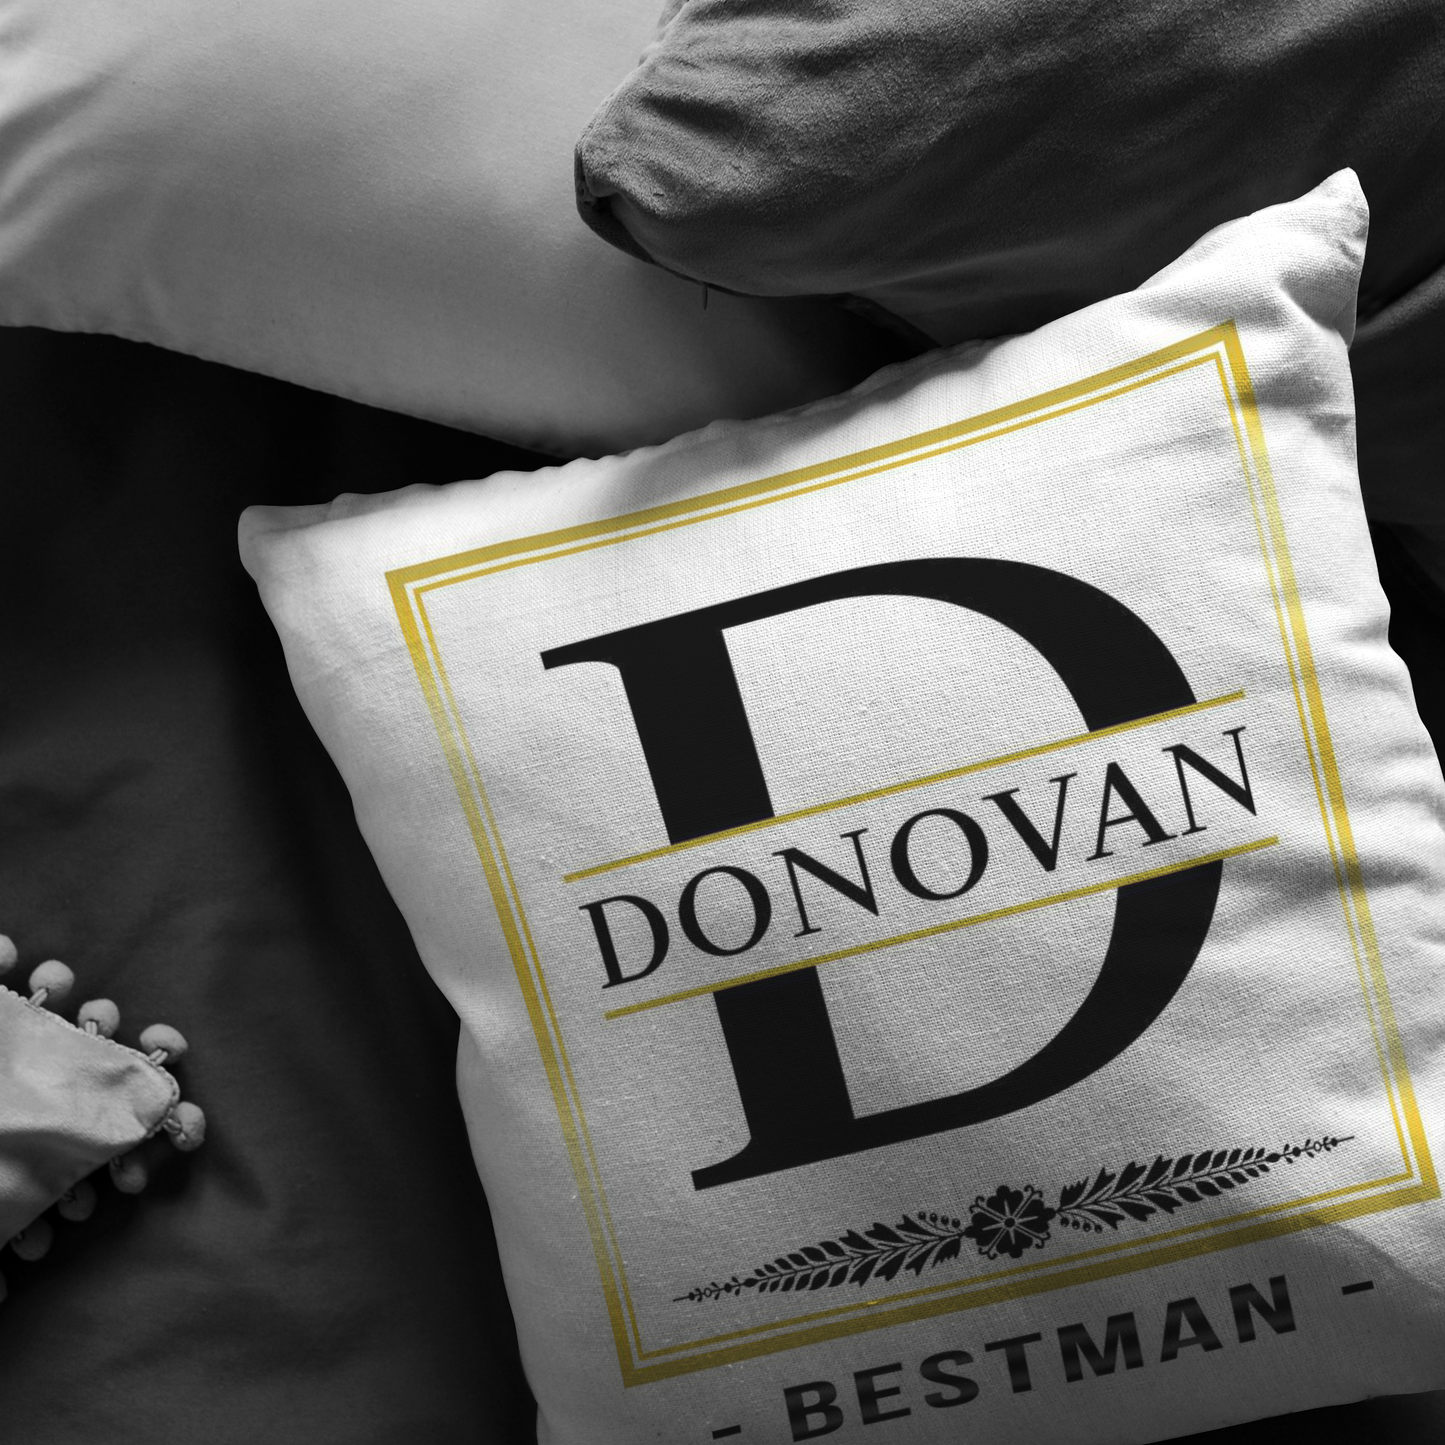 ND-pl21255277-sp-28950 - [ Donovan | 1 | 1 ] (PI_ThrowPillowCovers) Valentine Gift Idea For Him, Husband And Father With Name Do